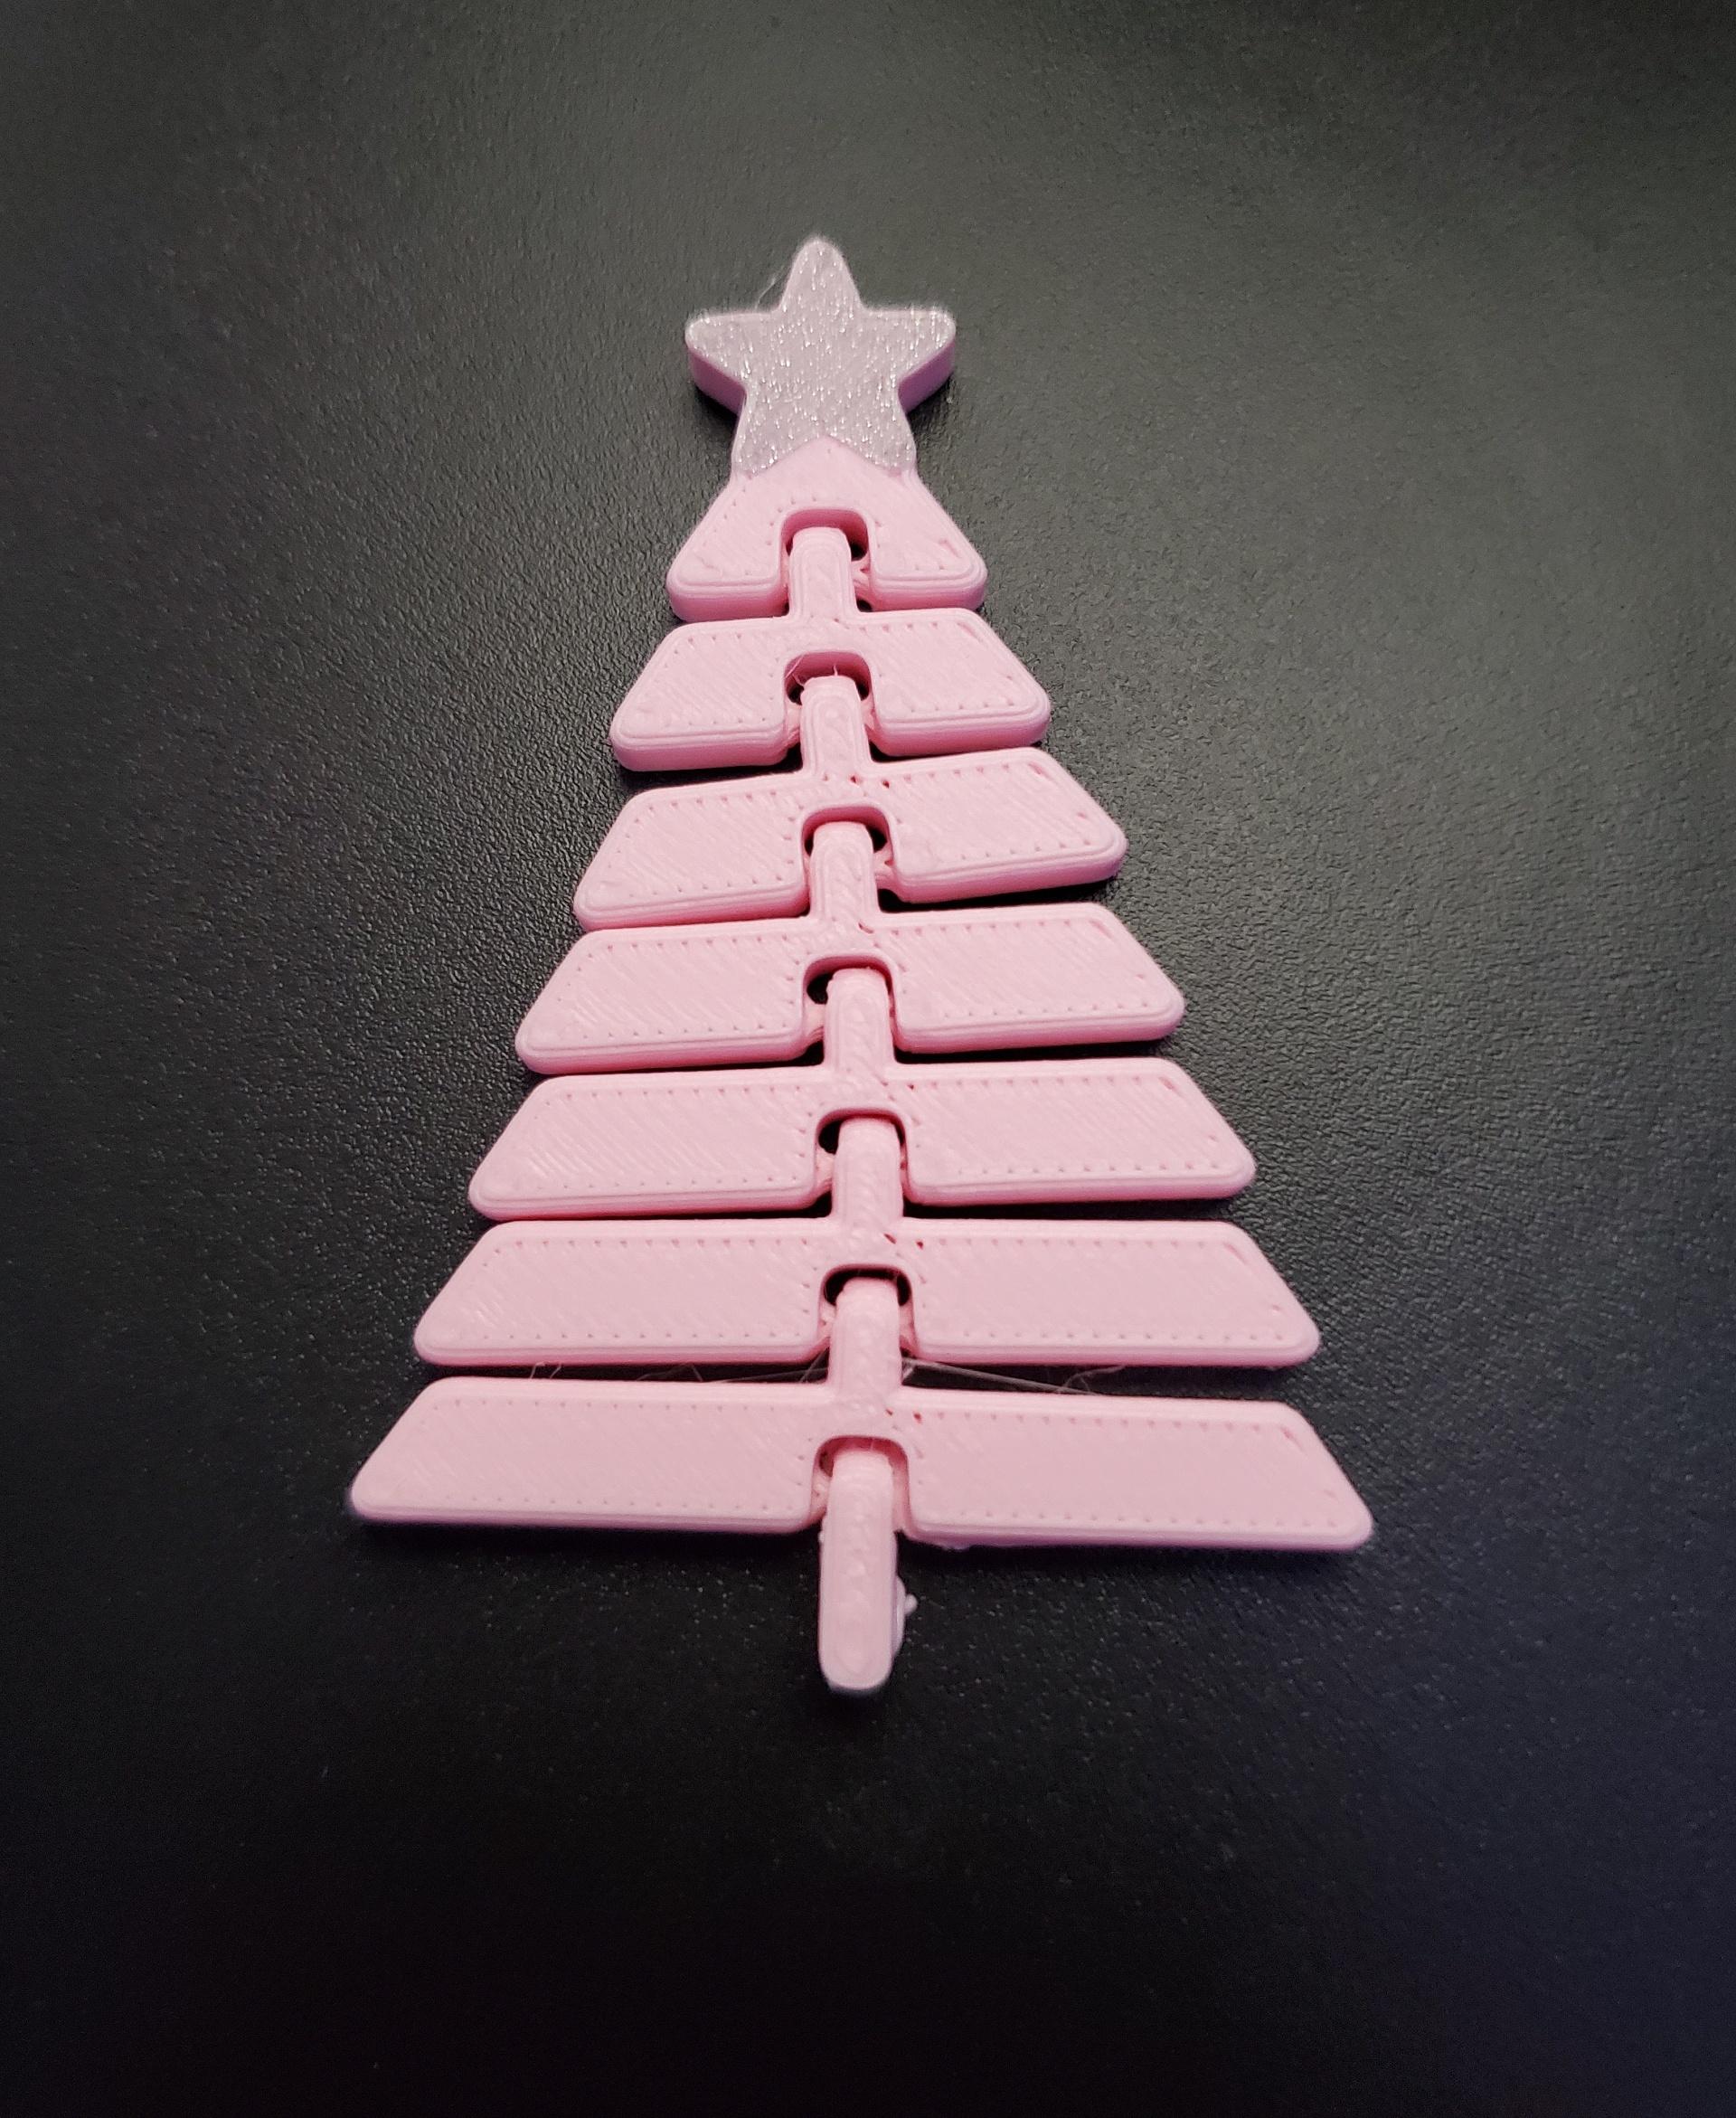 Articulated Christmas Tree with Star - Print in place fidget toy - 3mf - polyterra sakura pink - 3d model